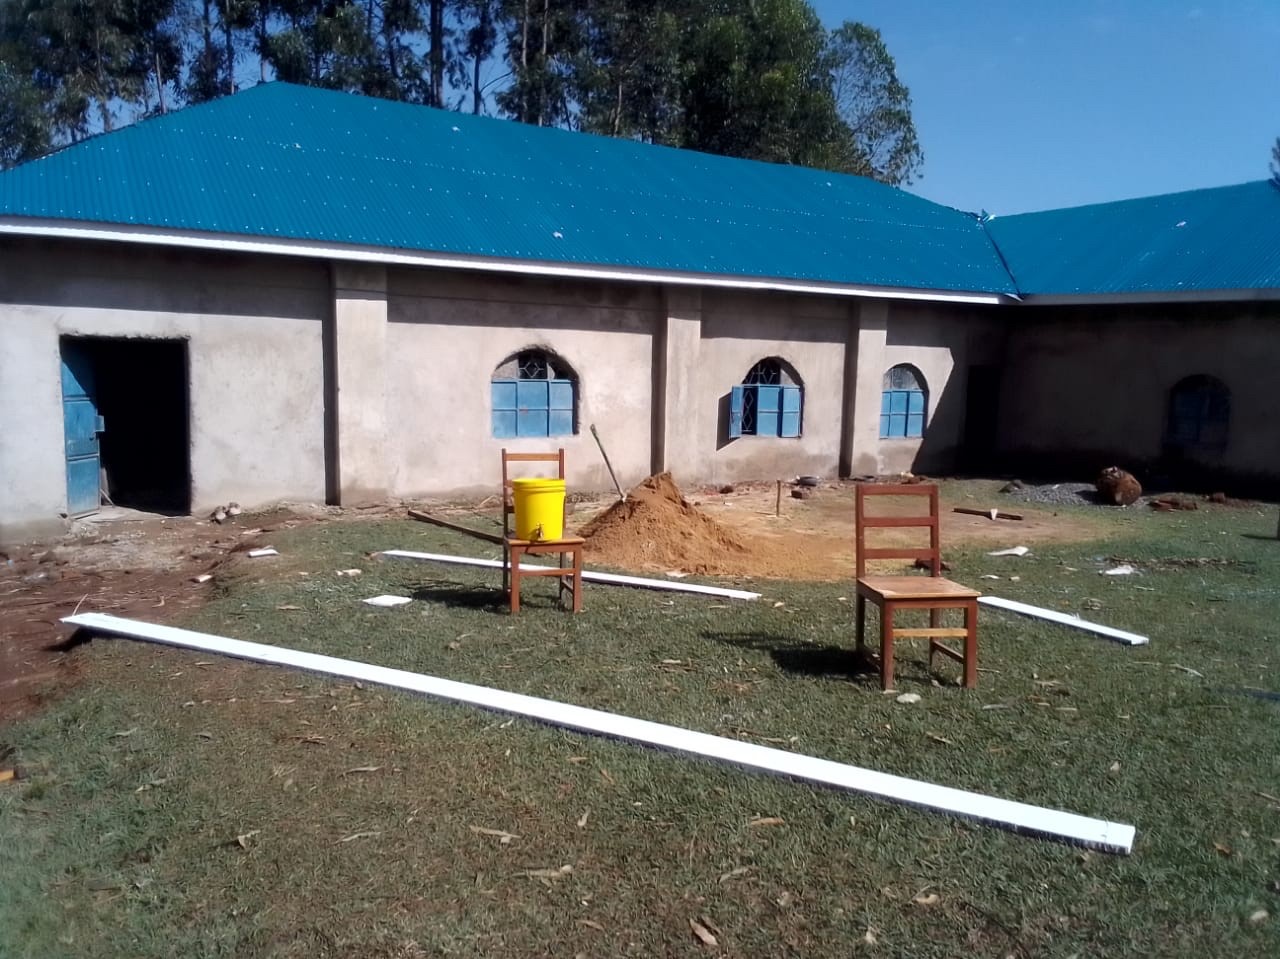 Irongo IPHC - Mother Church of IPHC in East Africa